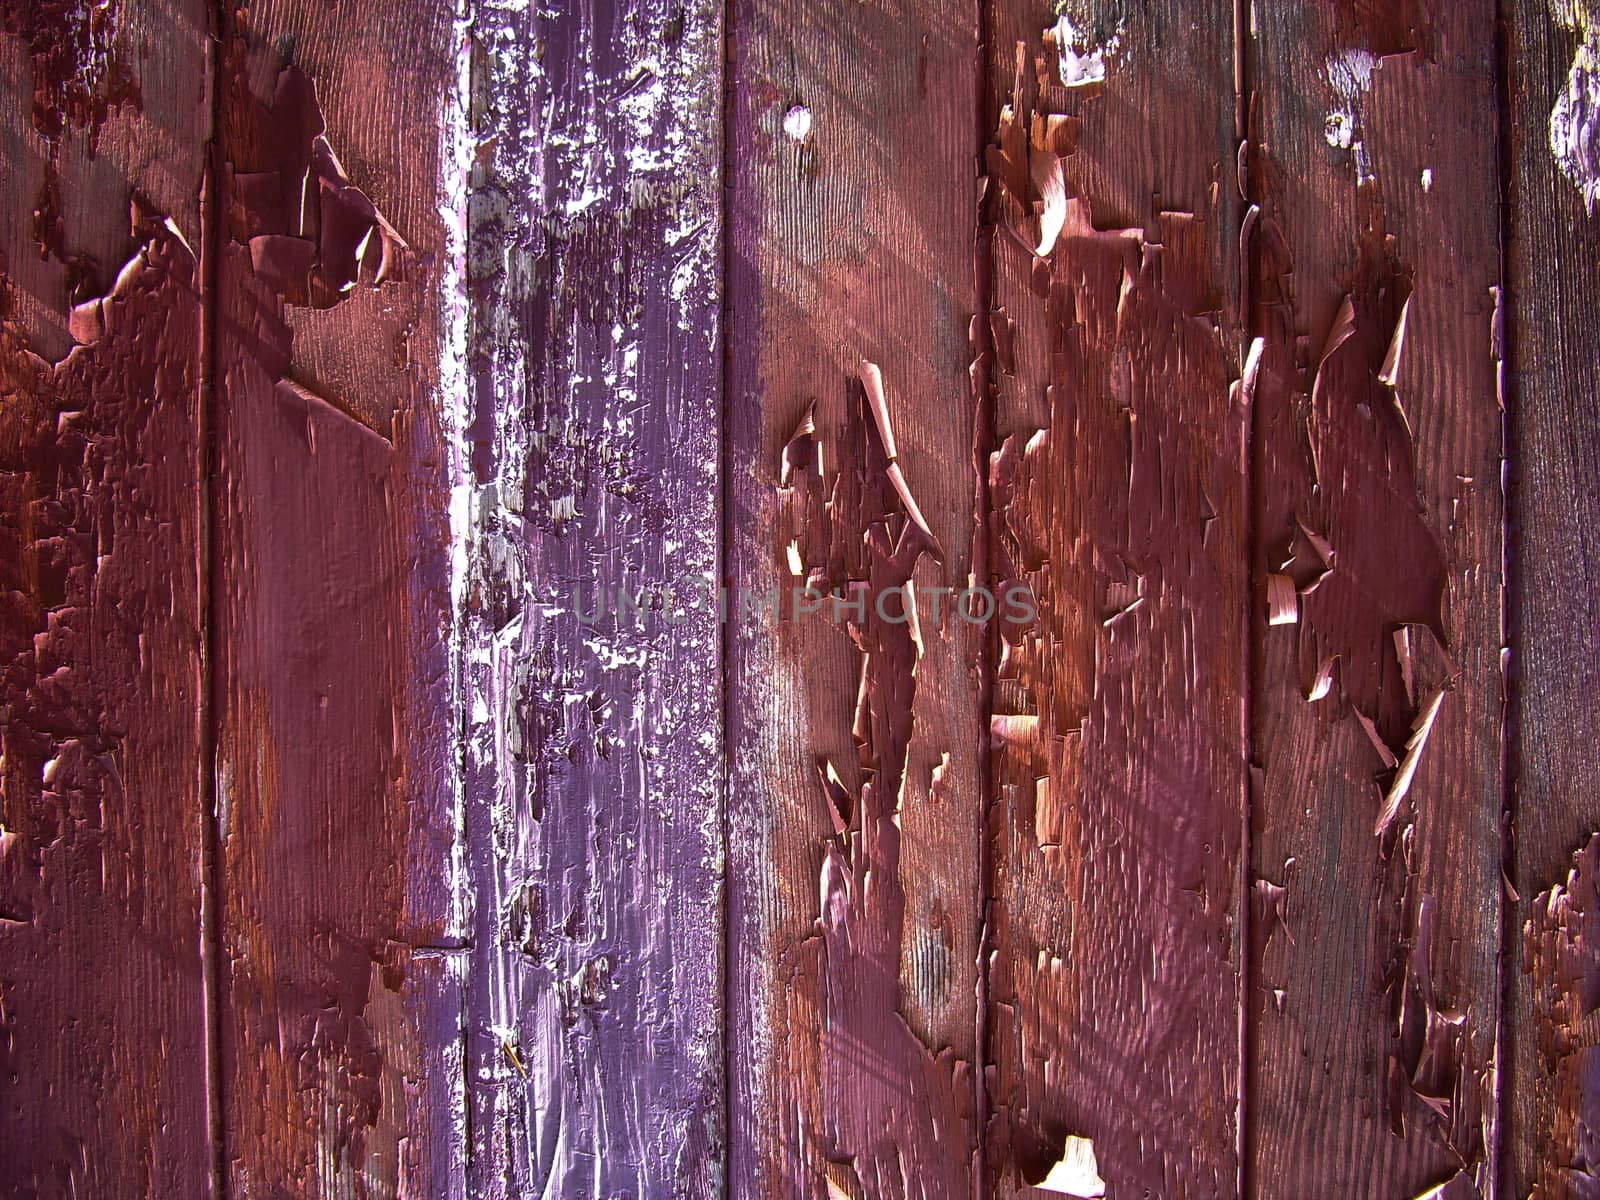 Flaking paint on old wood